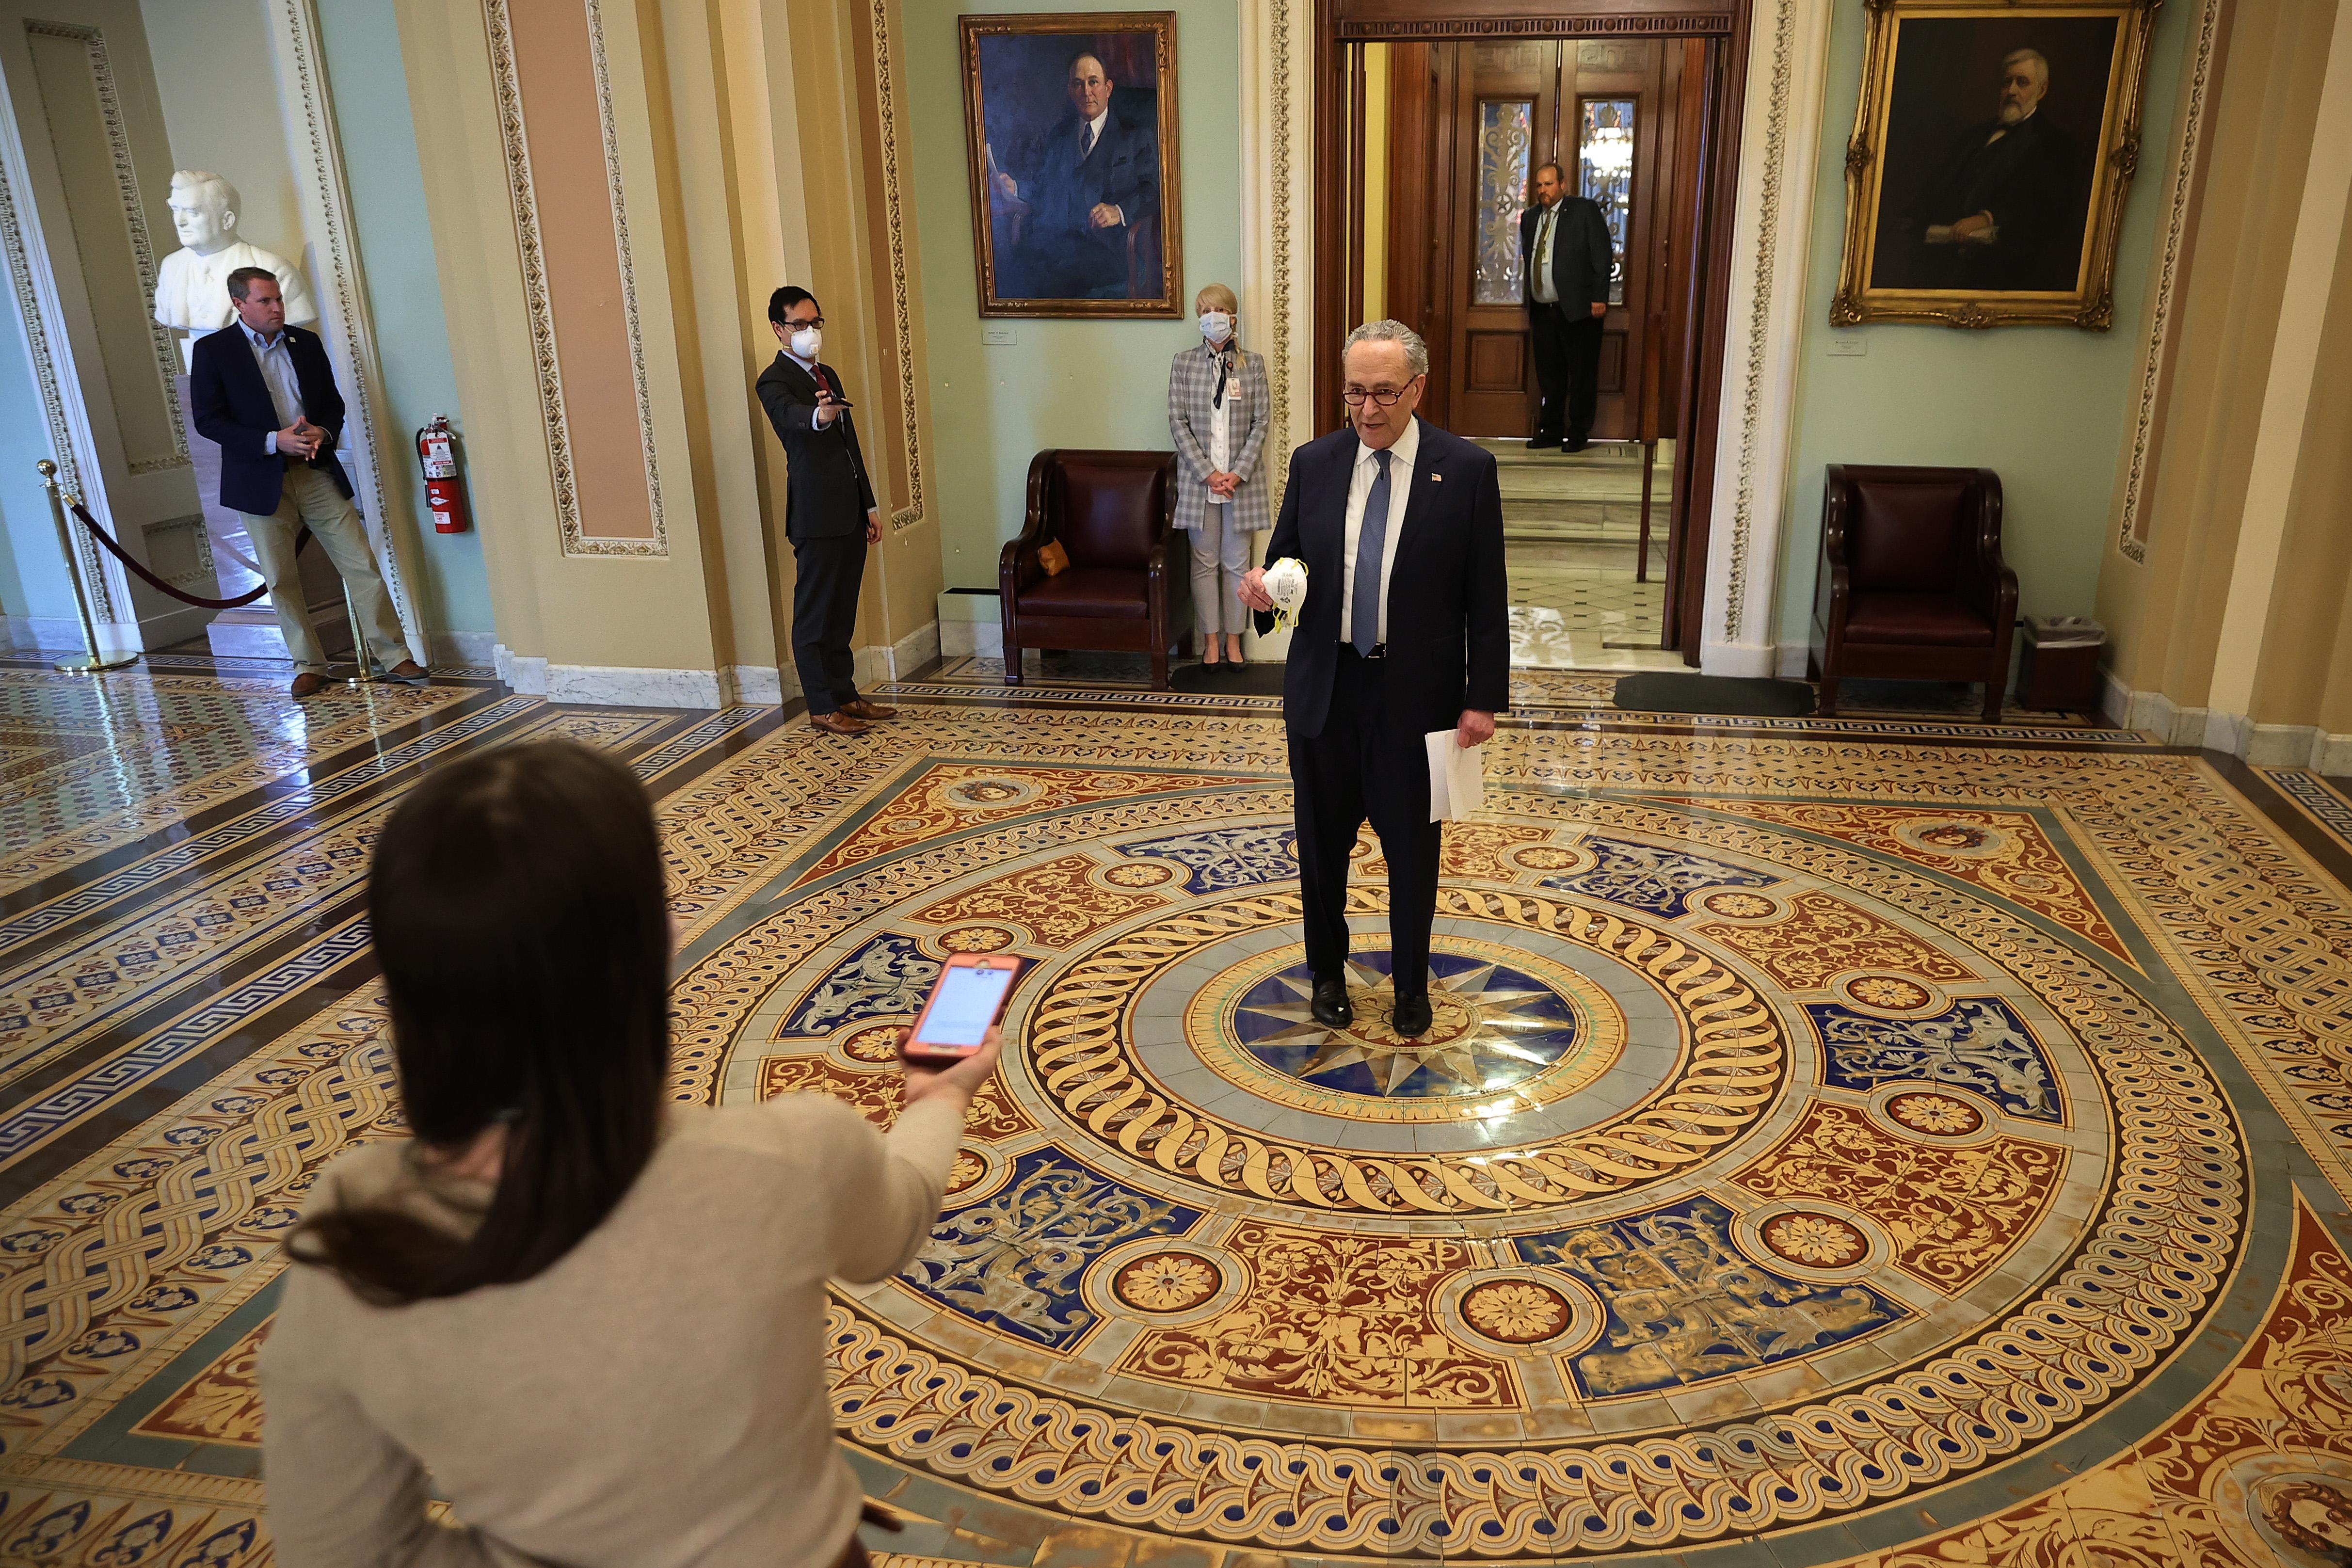 Schumer stands in the center of a room speaking to a reporter several feet away, recording the interview on a phone